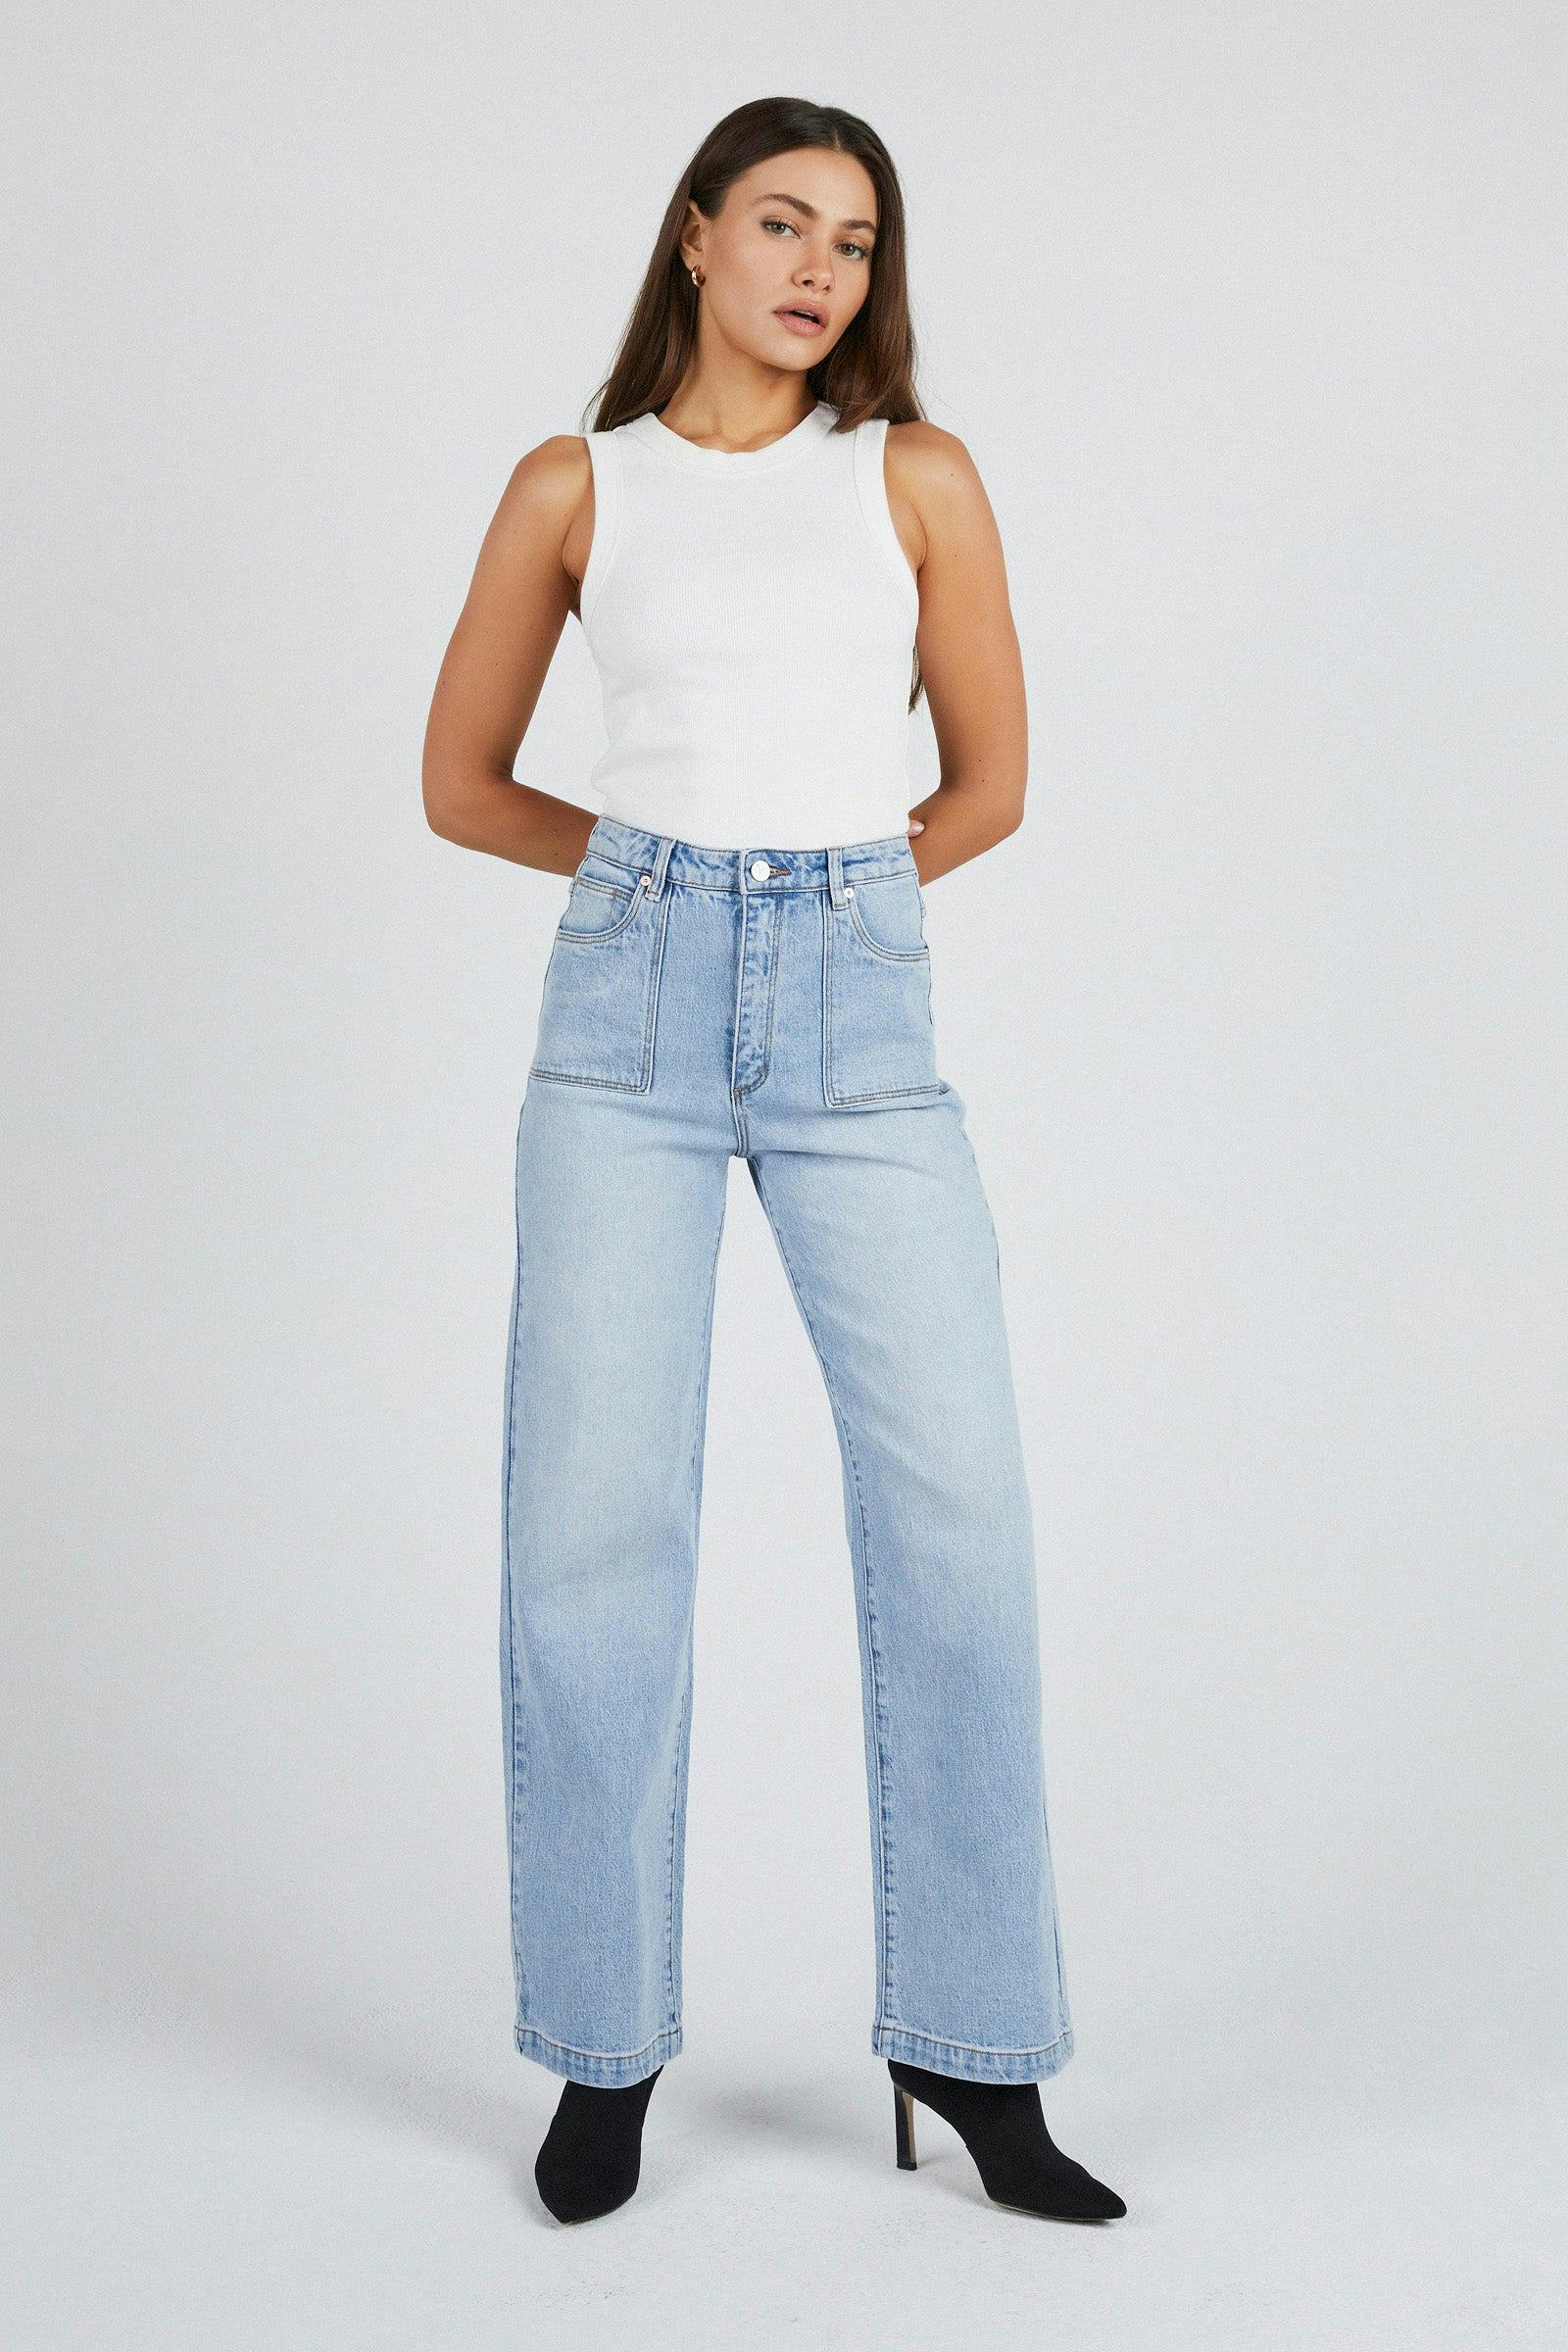 Buy Womens High Rise Jeans Online